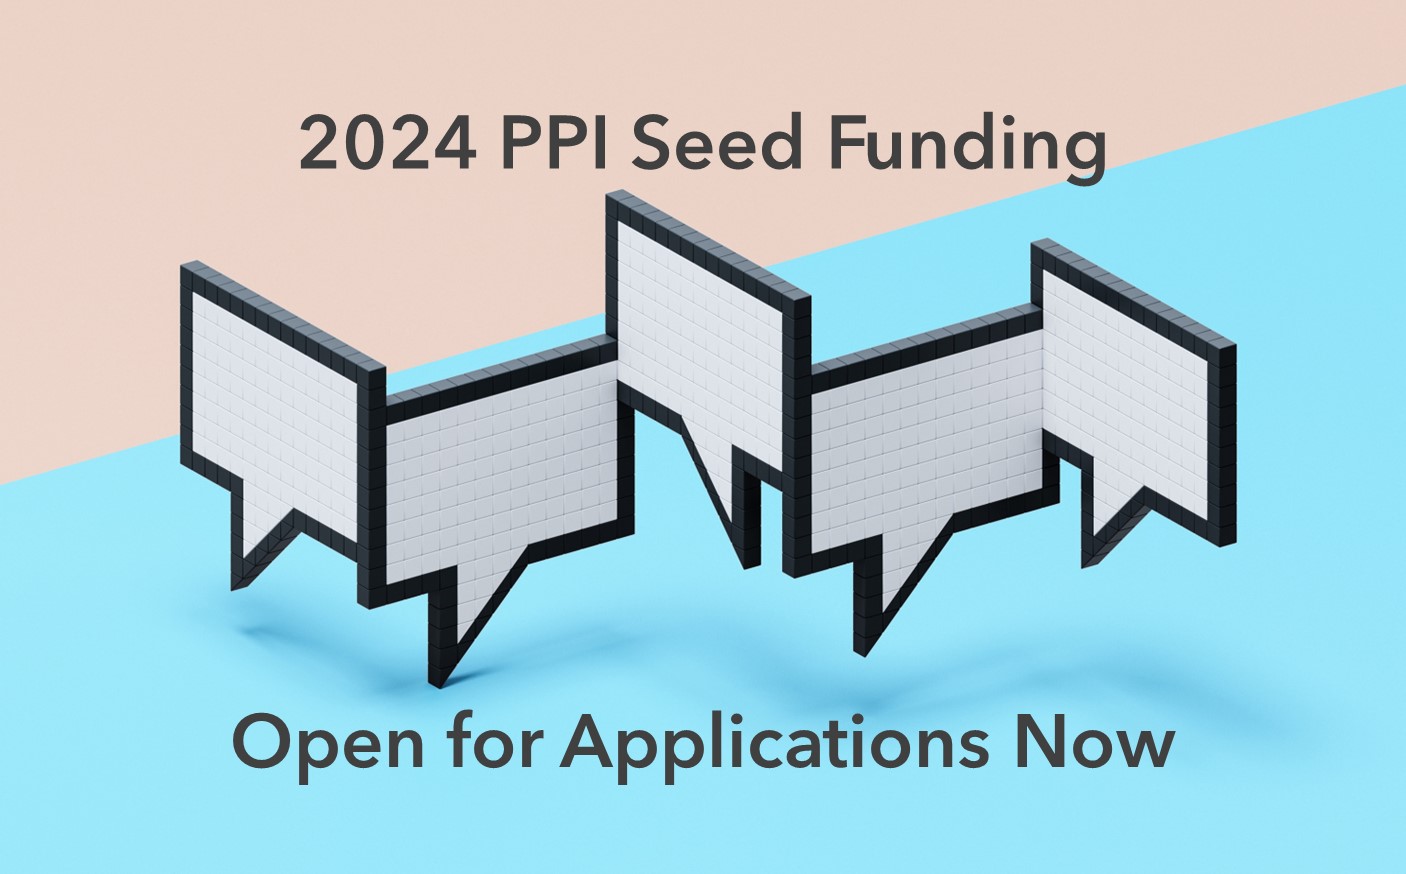 Applications are now open for the 2024 round of PPI seed funding.